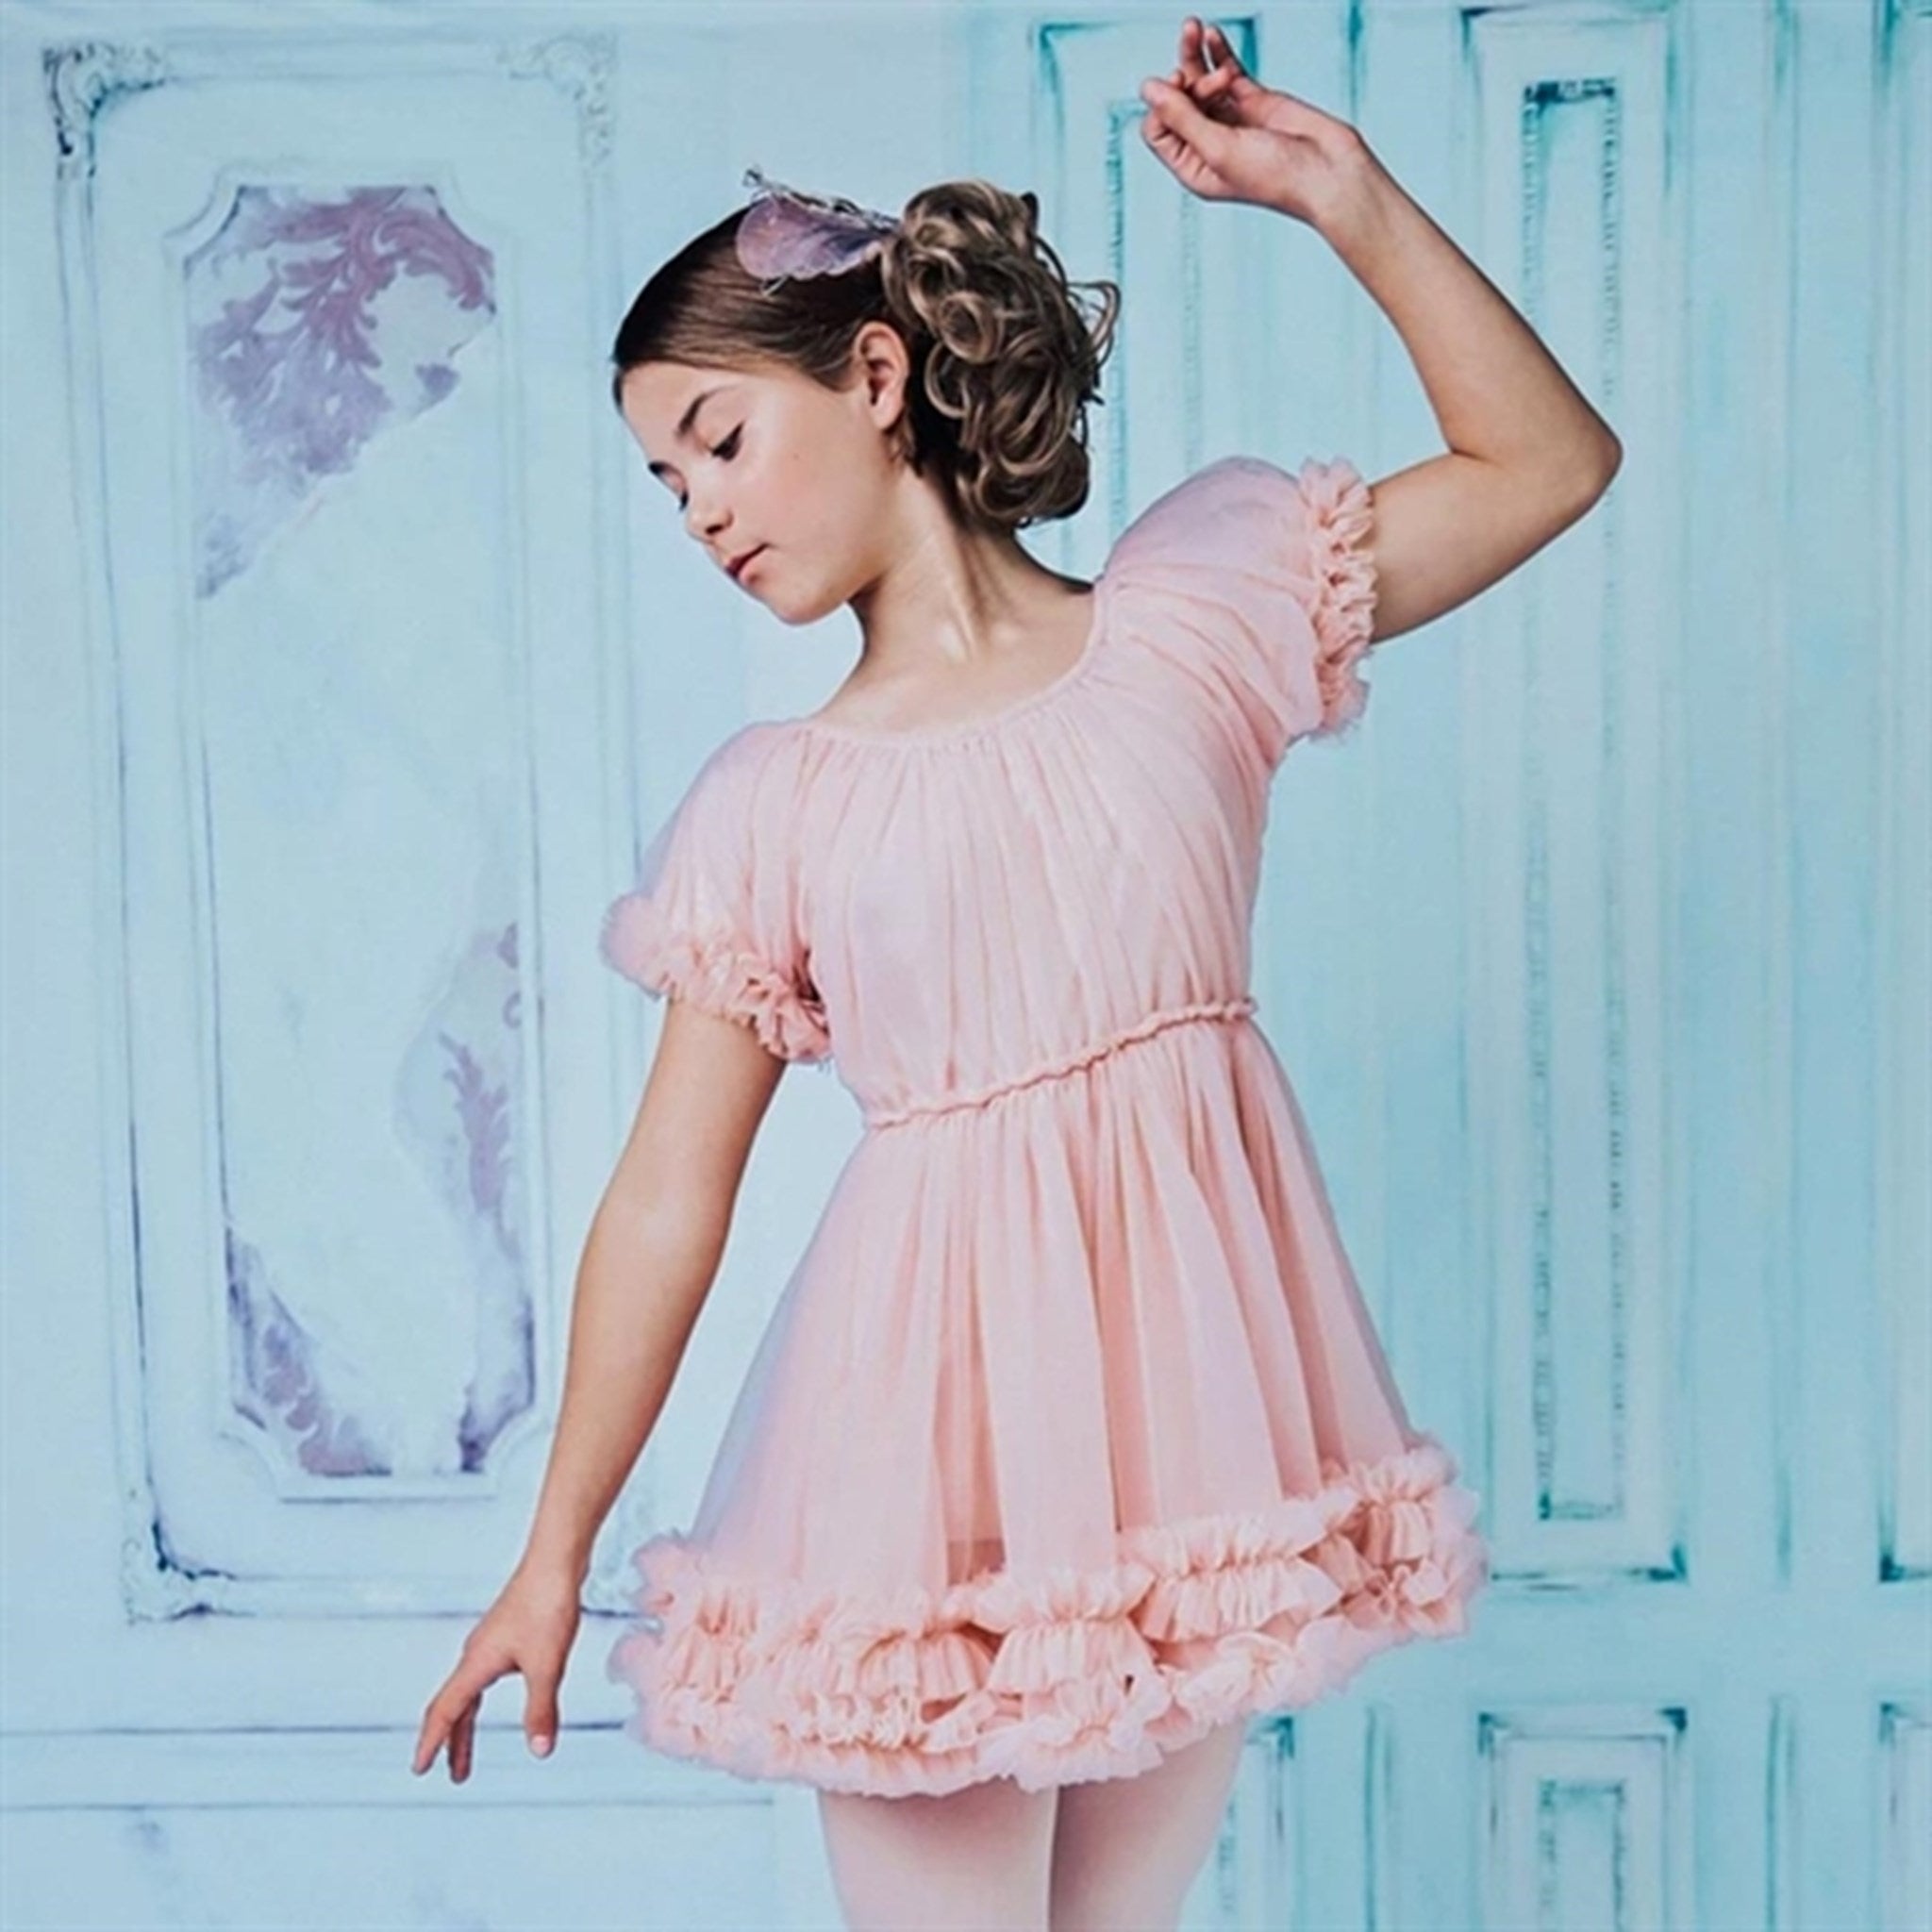 Dolly by Le Petit Frilly Klänning Ballet Pink 2